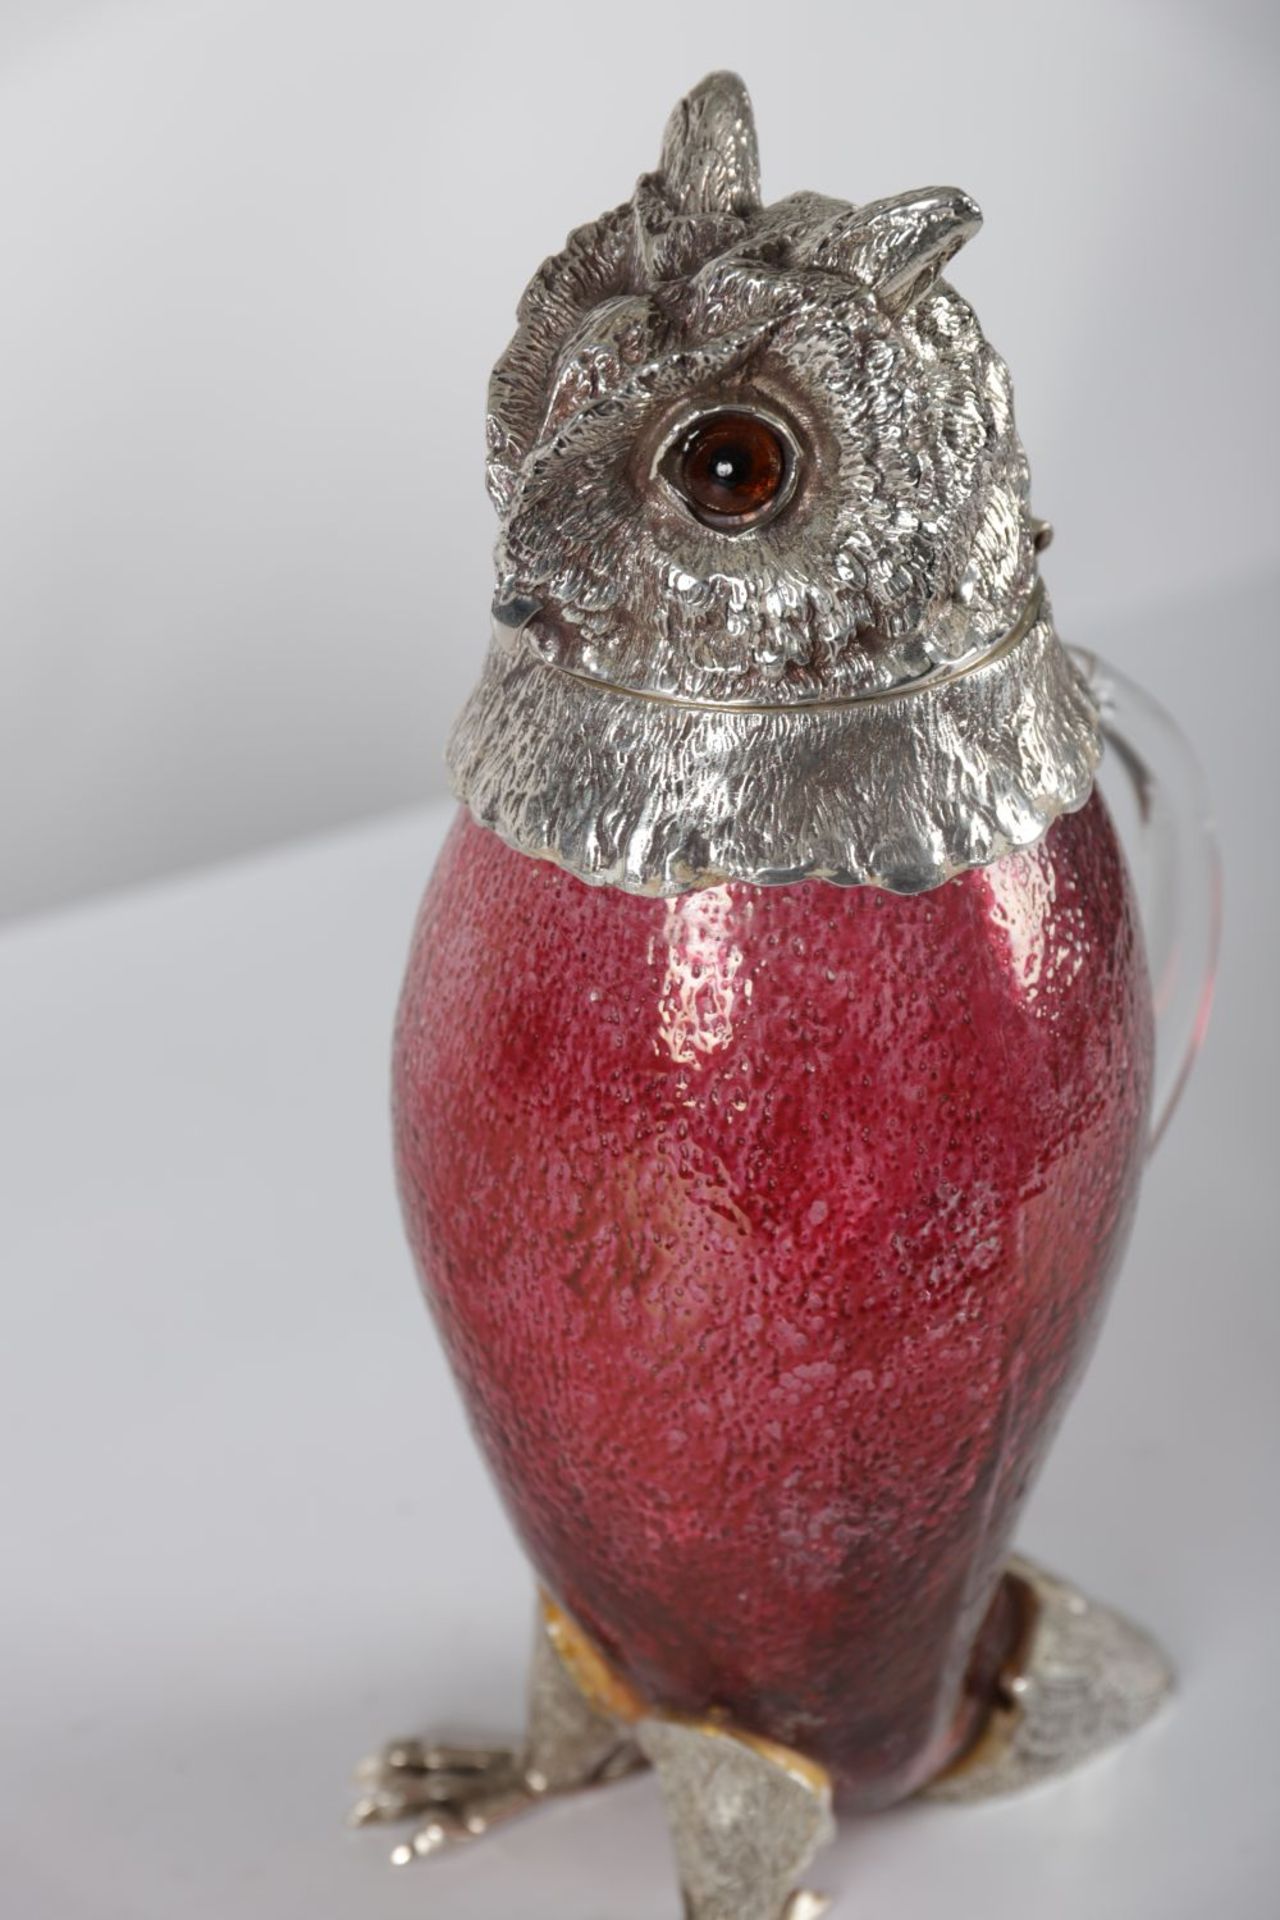 SILVER-PLATED RUBY GLASS CLARET JUG - Image 2 of 3